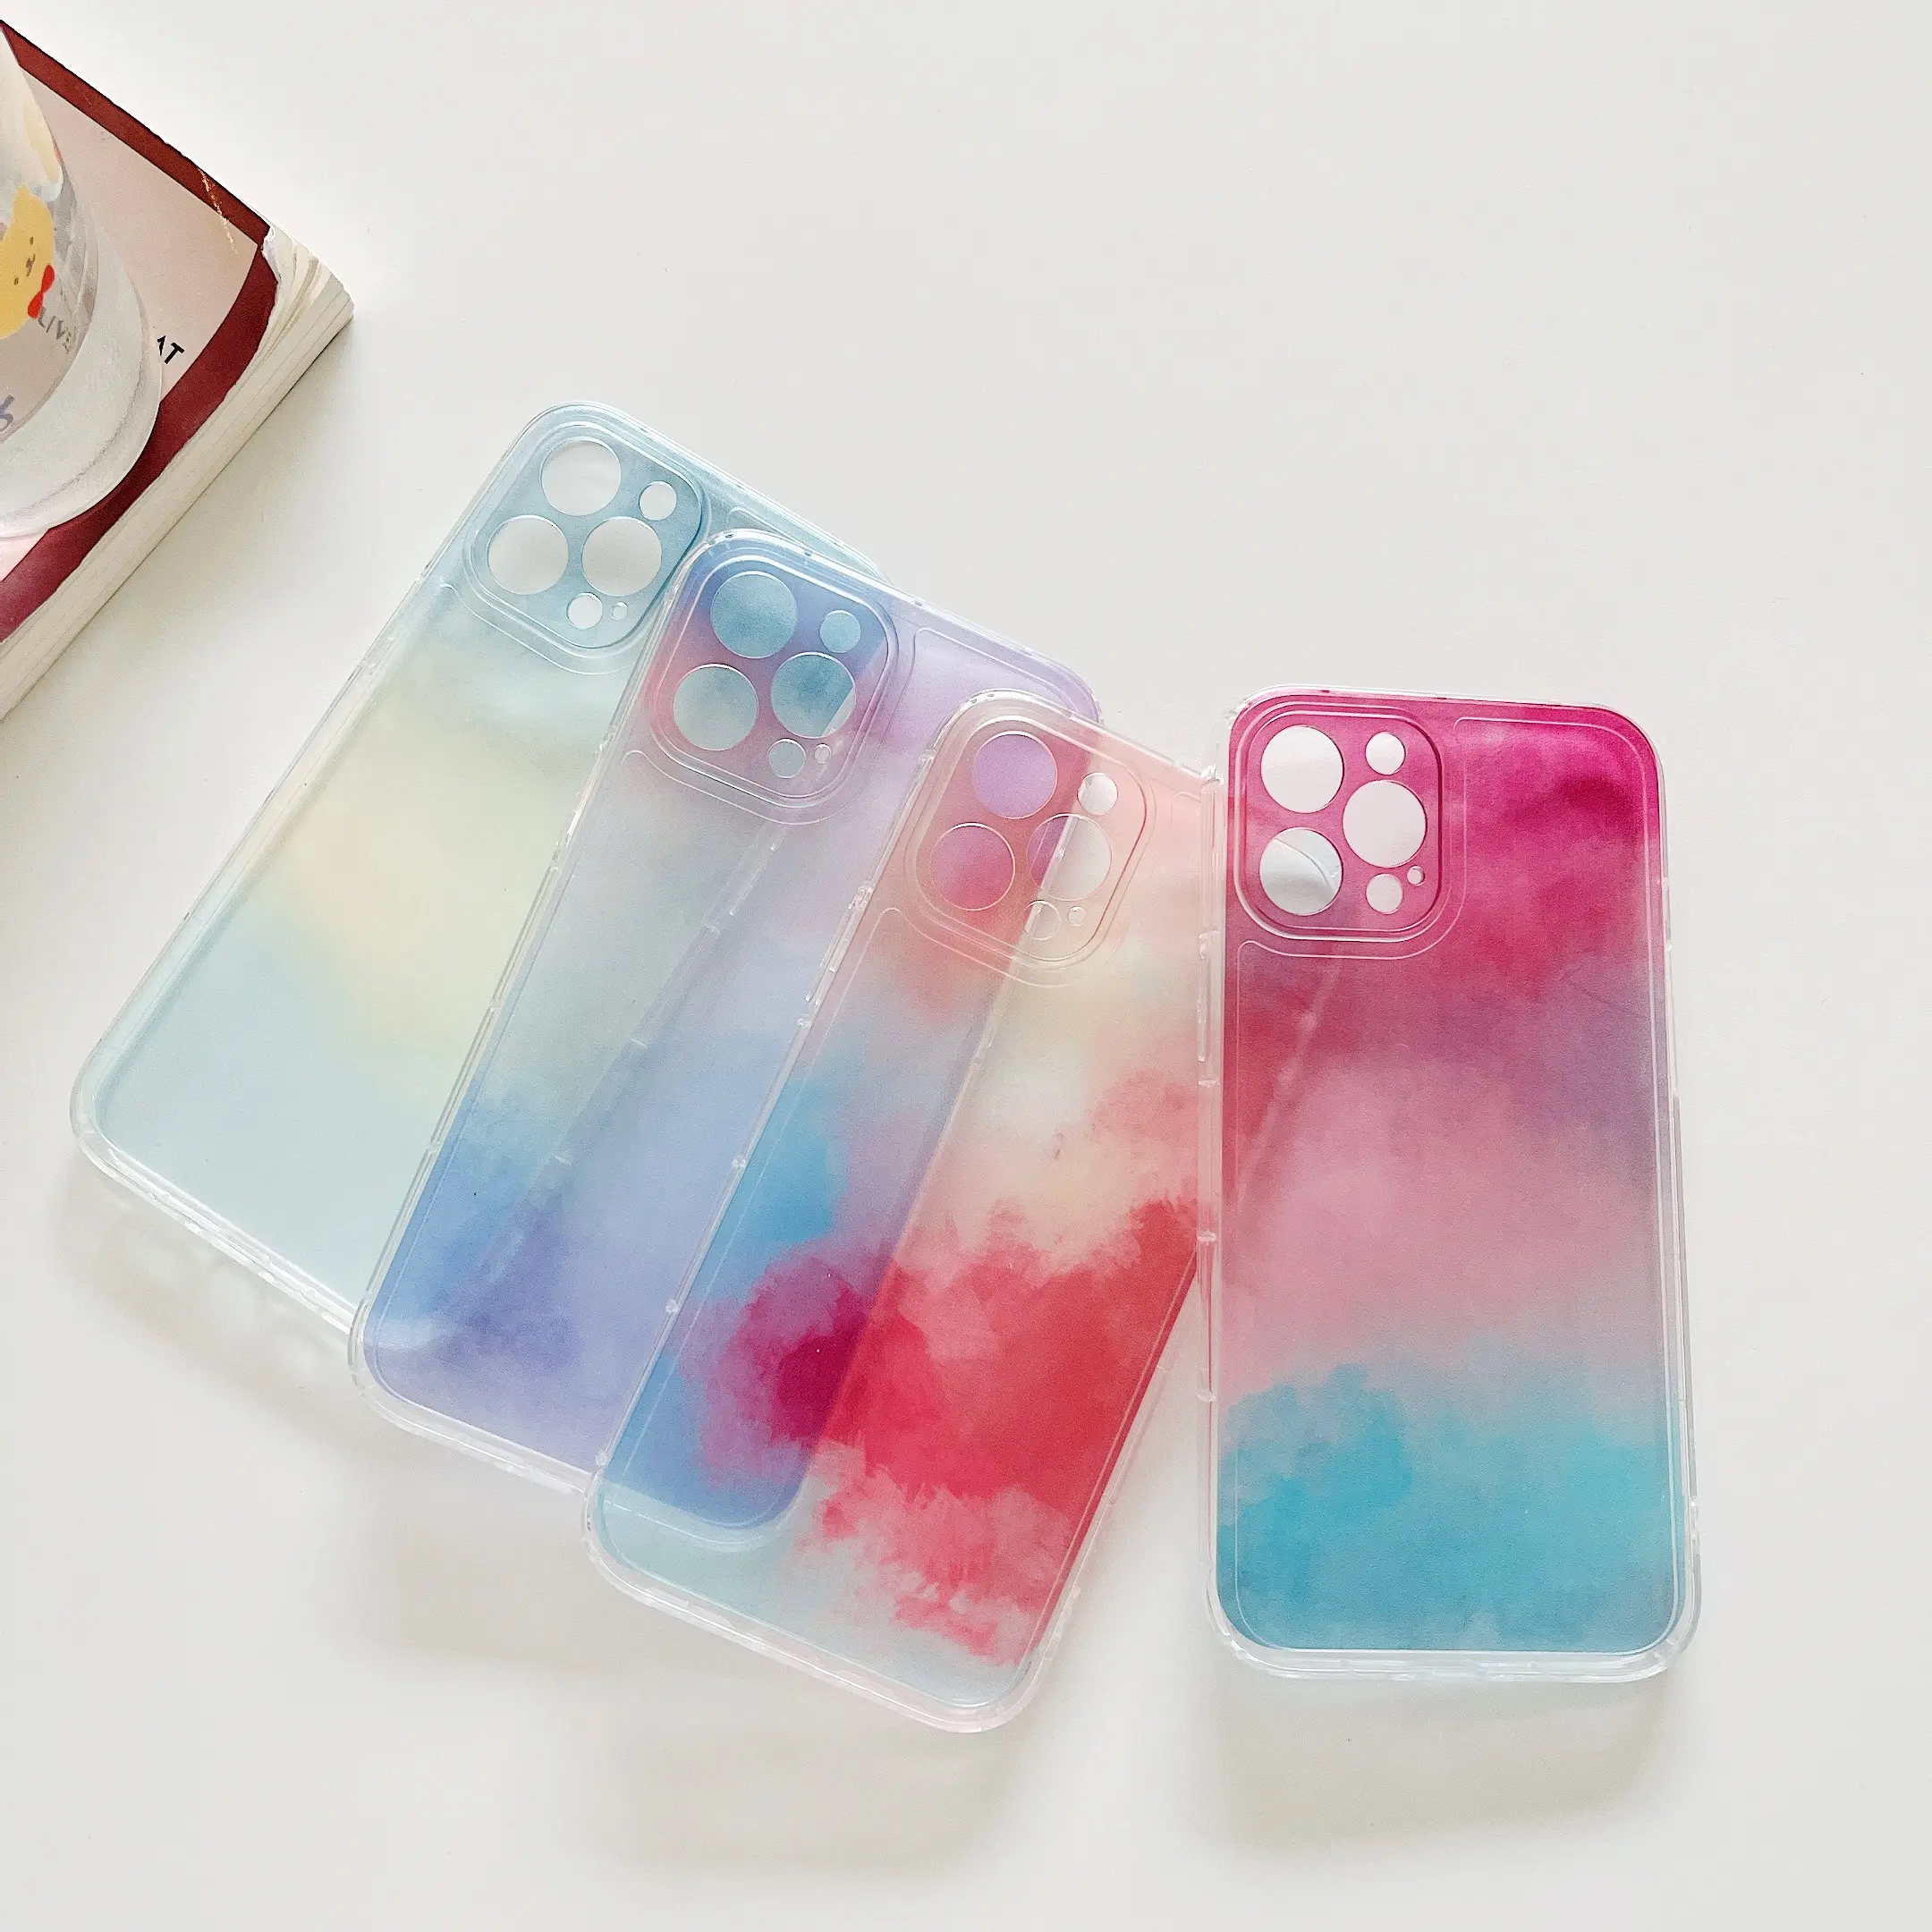 2022 hot sales Marble Transparent Card Phone Case for IPhone 12 Pro 11Pro Max XS Max XR X 7 8Plus Pink Purple Clear TPU Cover